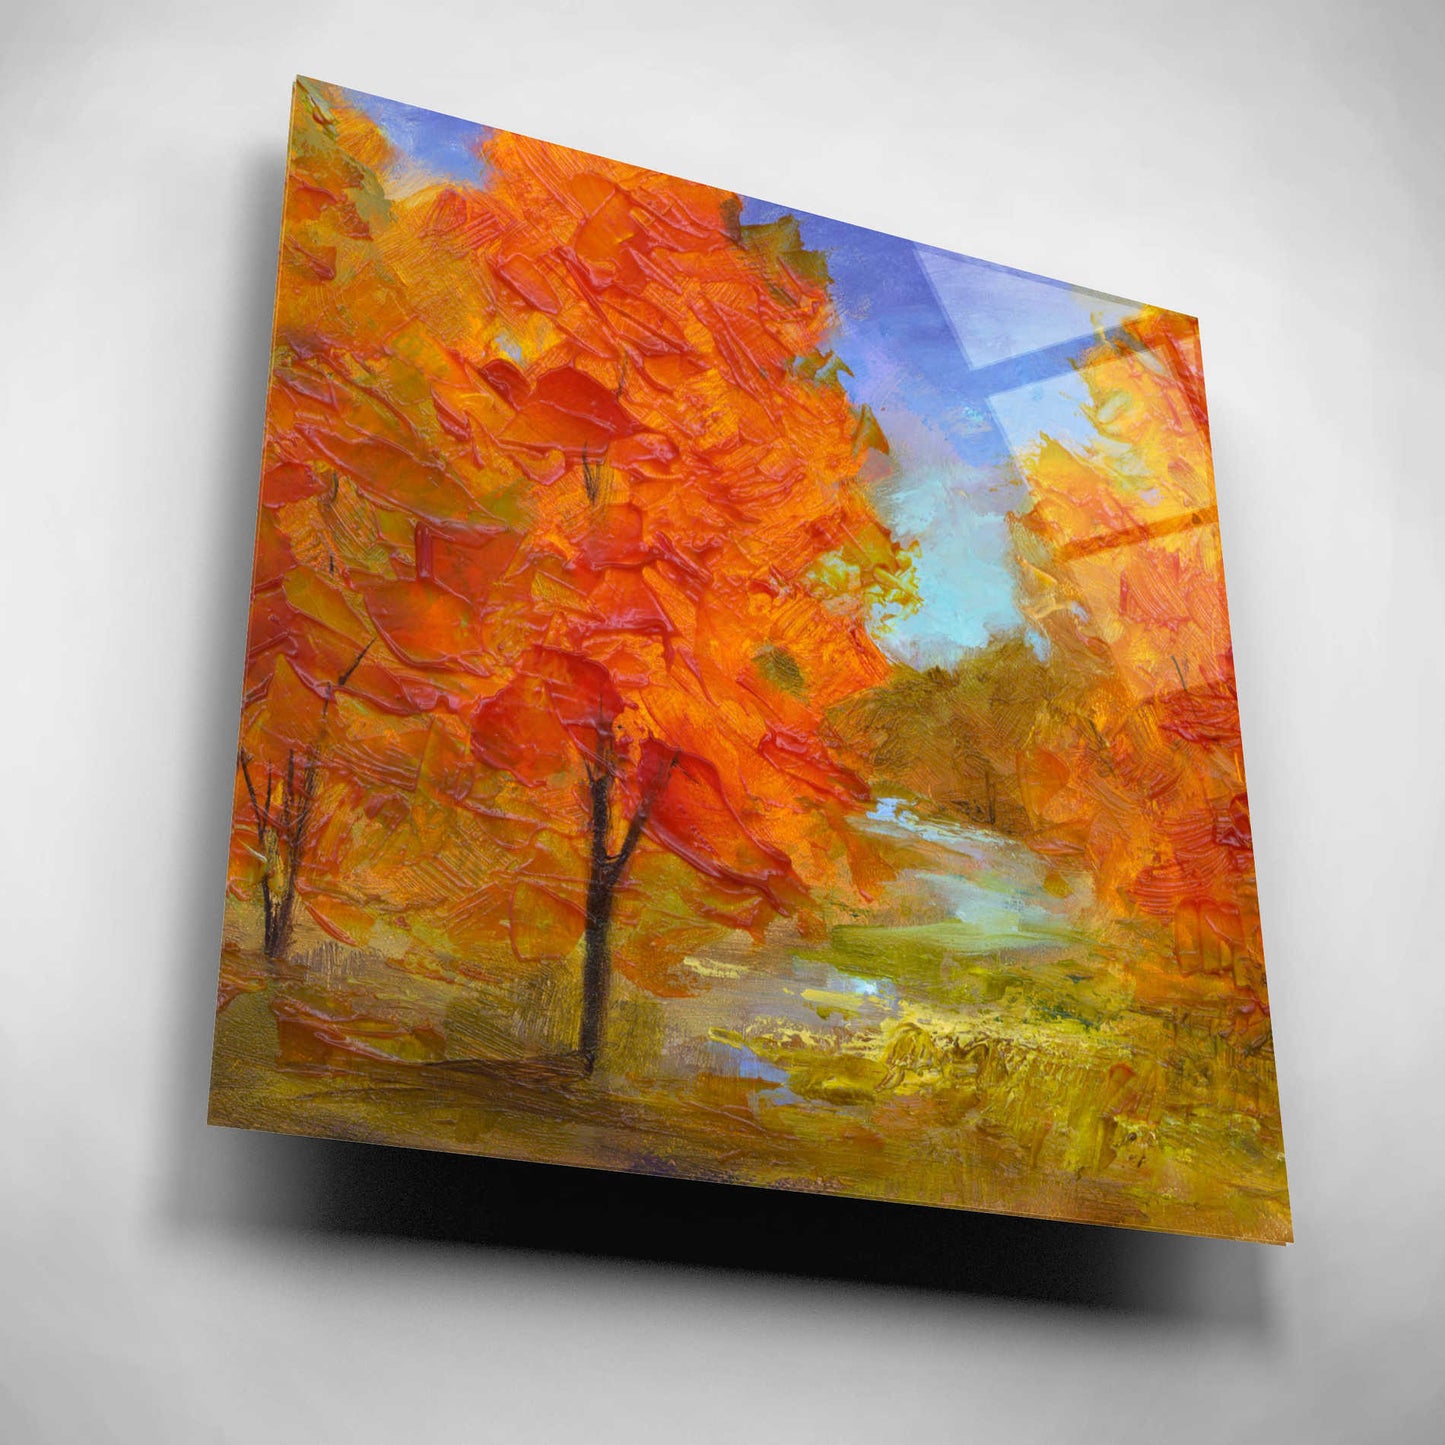 Epic Art 'Burst of Autumn Color' by Sheila Finch, Acrylic Glass Wall Art,12x12